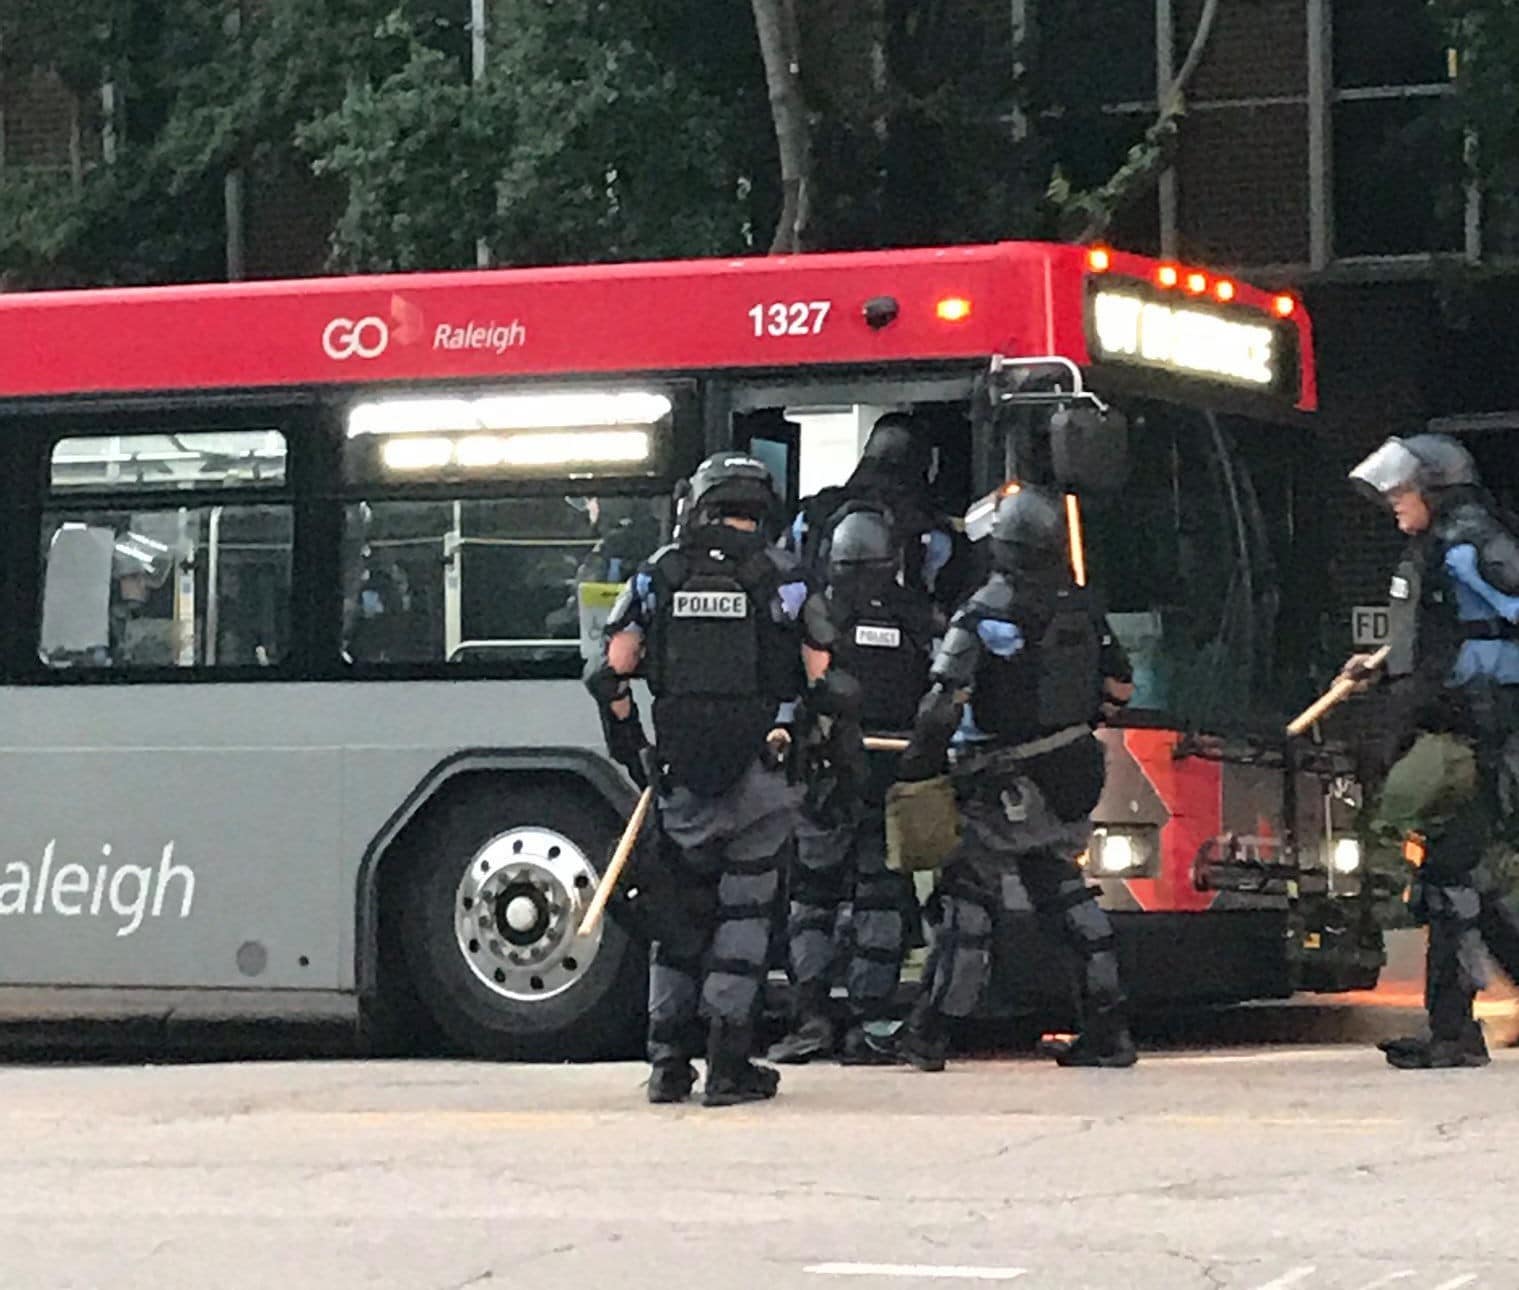 GoRaleigh Buses used During BLM Protests